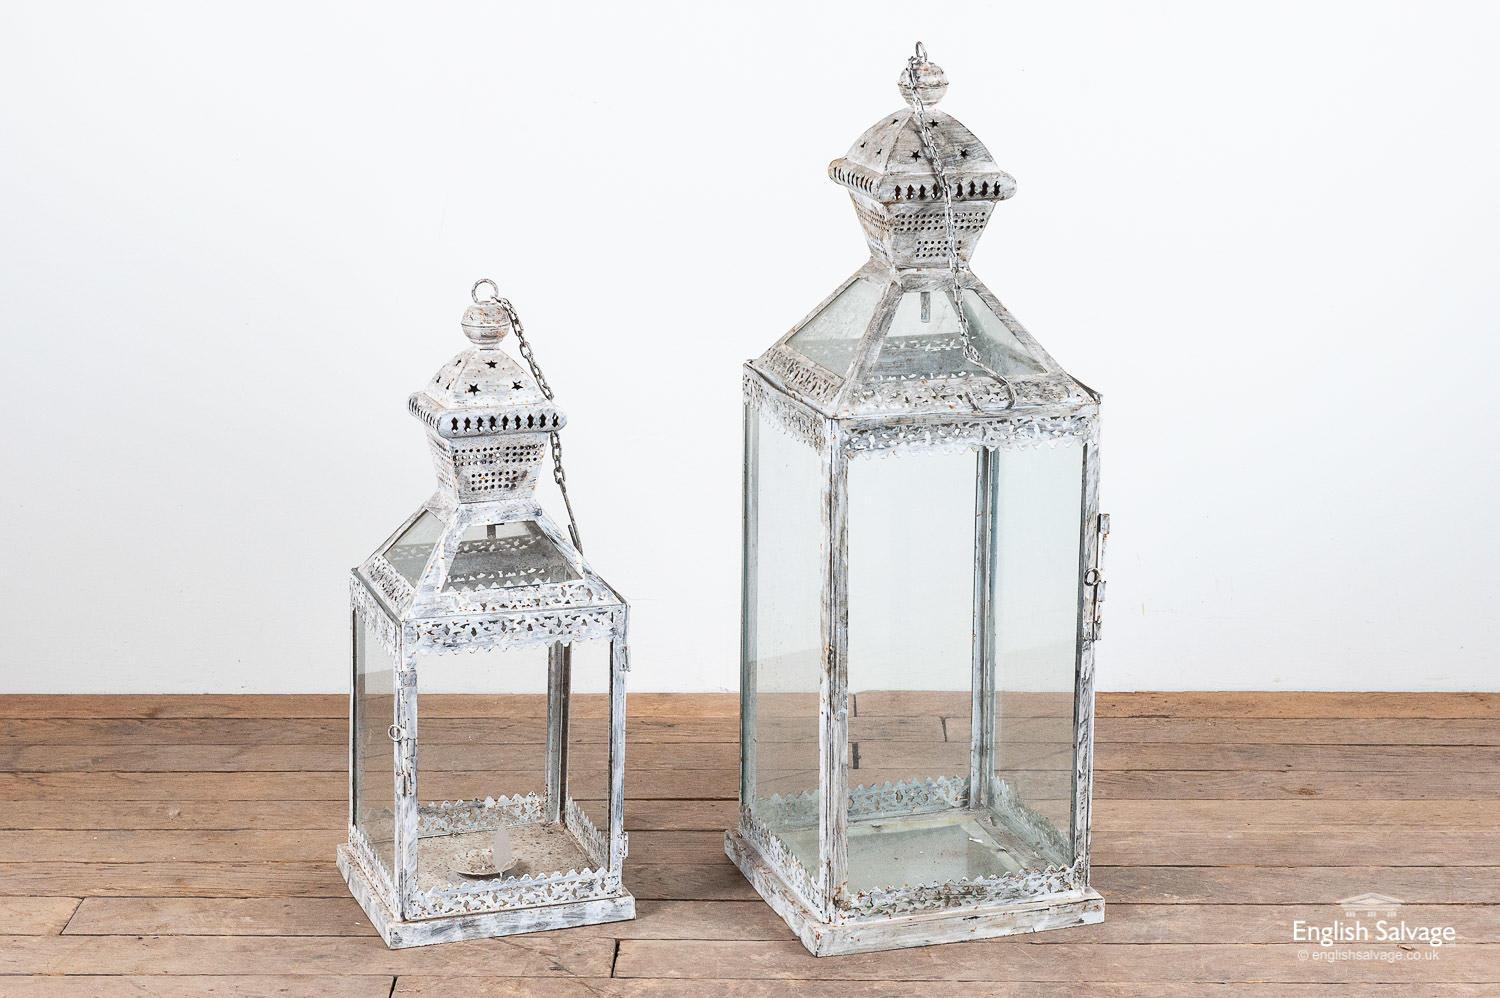 Attractive candle / tealight lanterns with a distressed grey paint finish and pretty latticework and stars detailing. Hanging chains and hinged doors. The smaller one is missing two panes of glass to the sides. Measurements below are for the larger